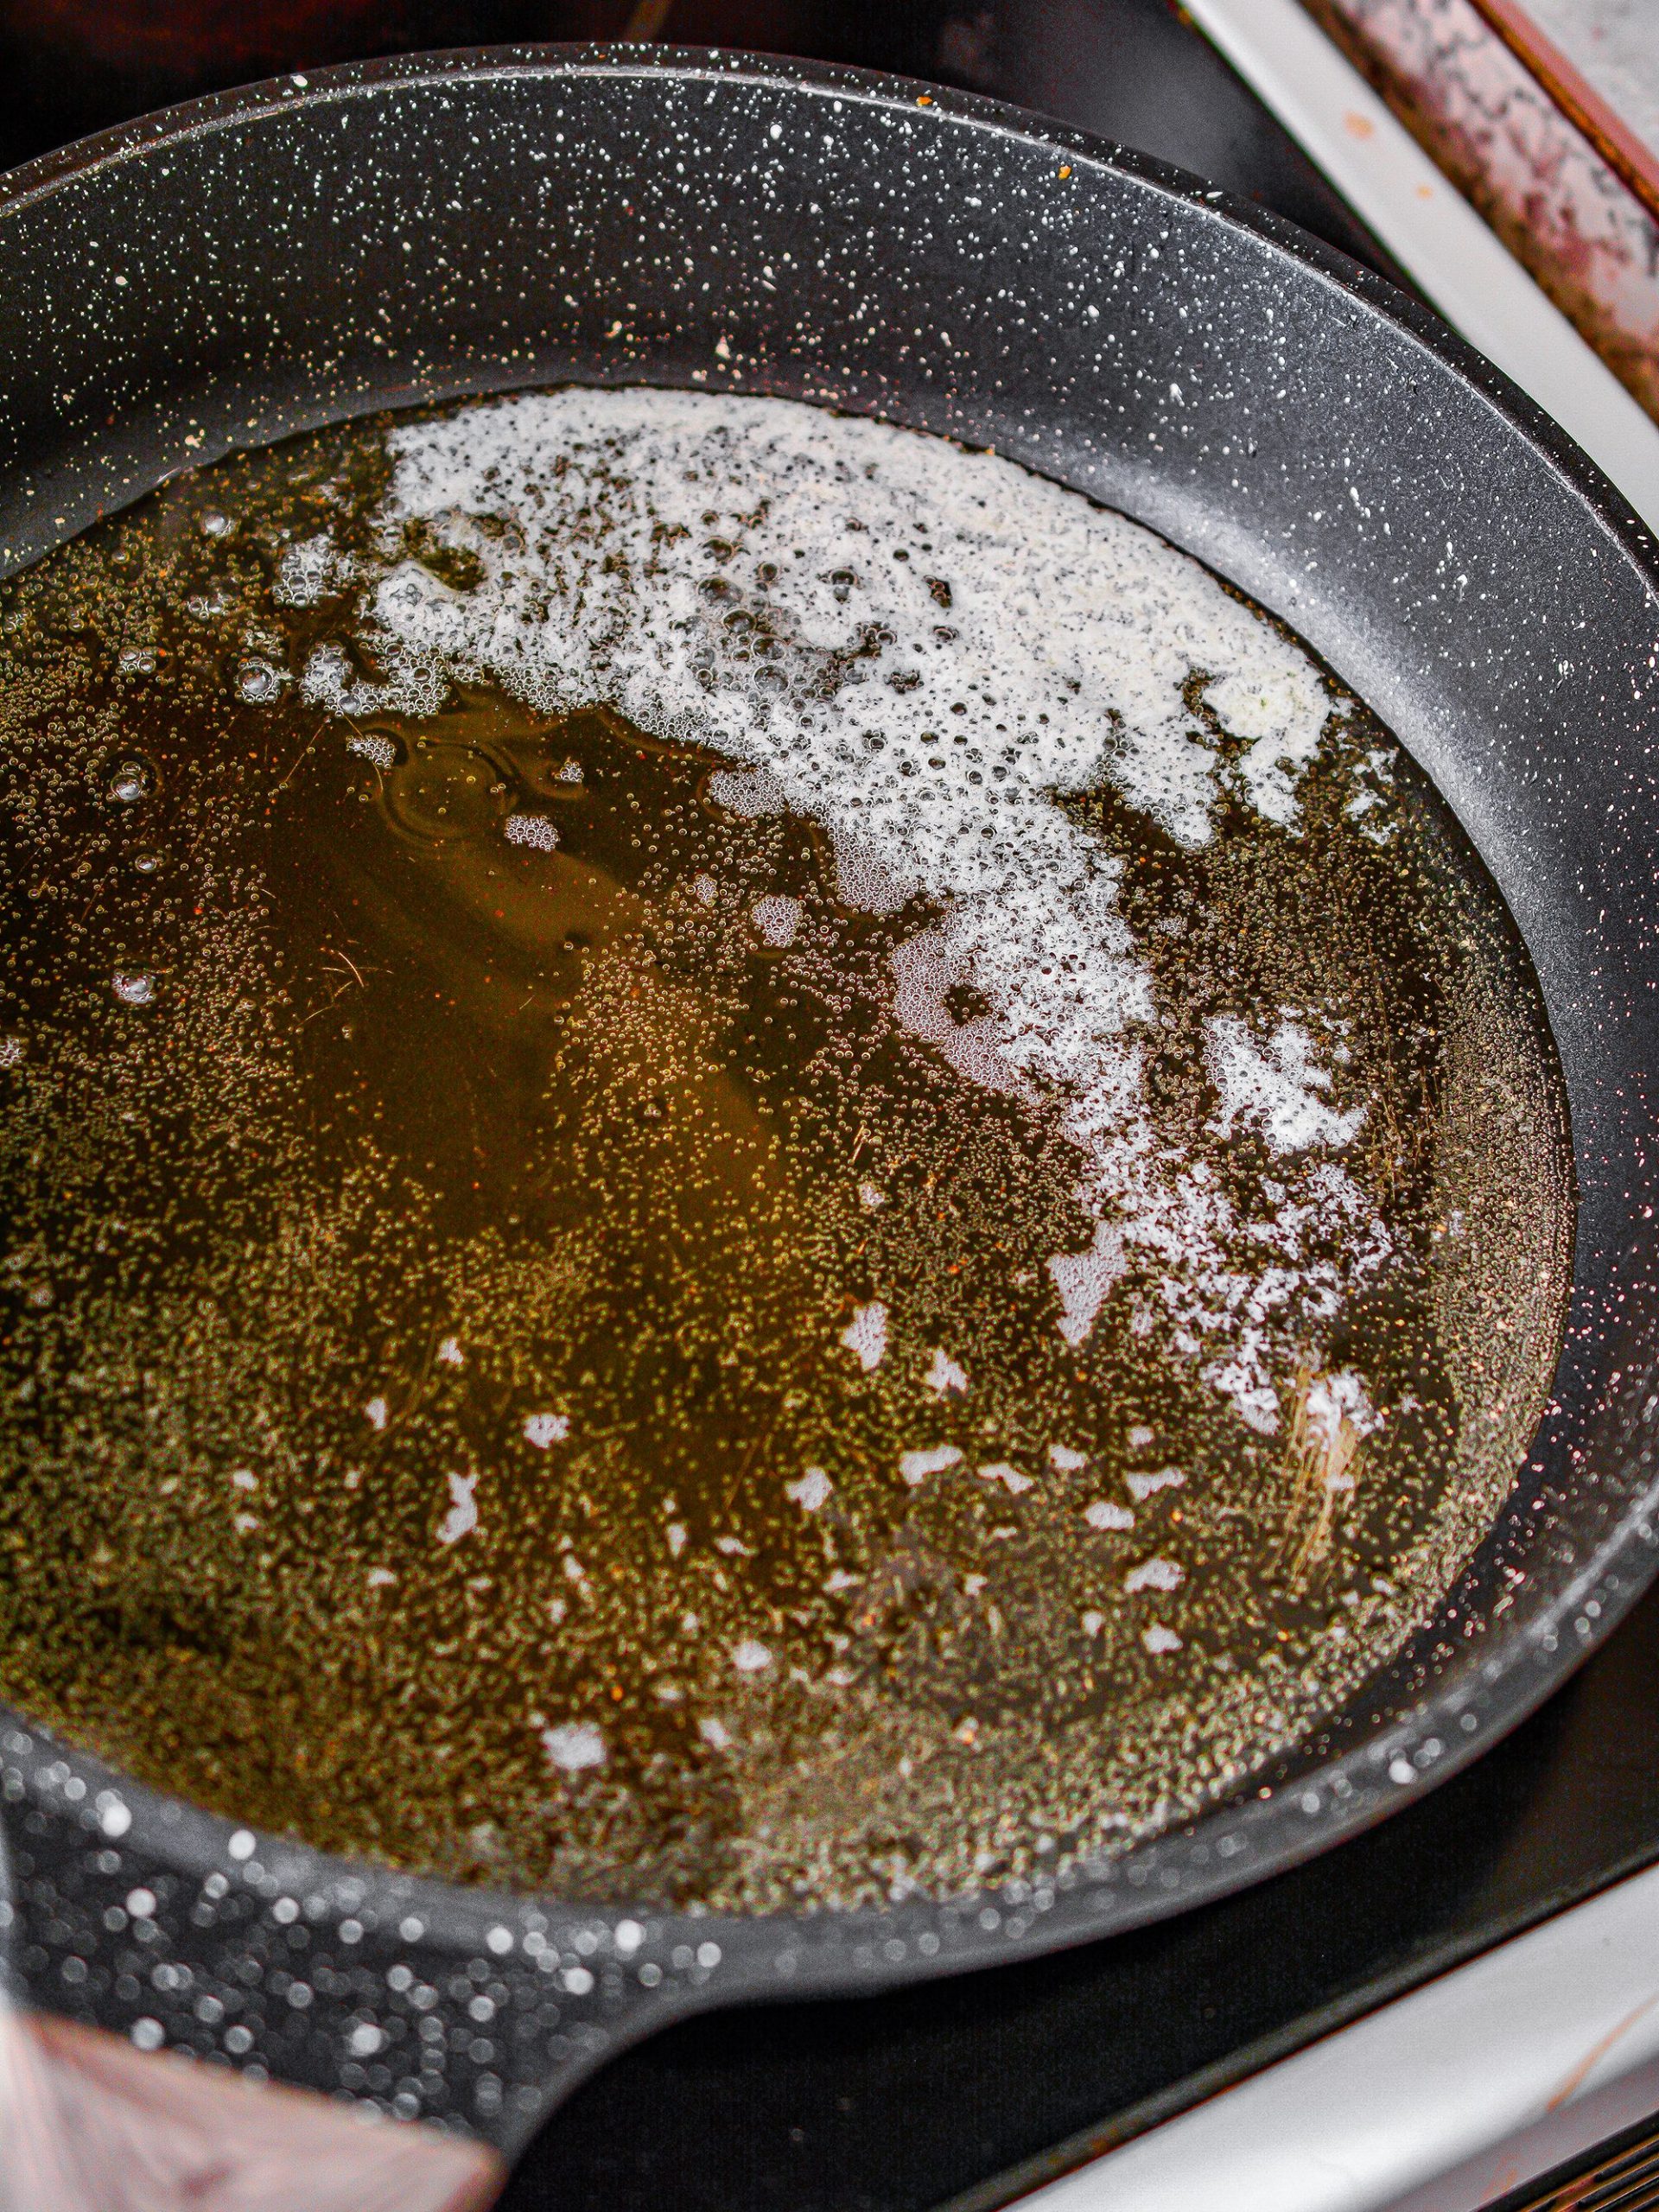 Heat a layer of peanut oil and the butter in a skillet over medium-high heat.